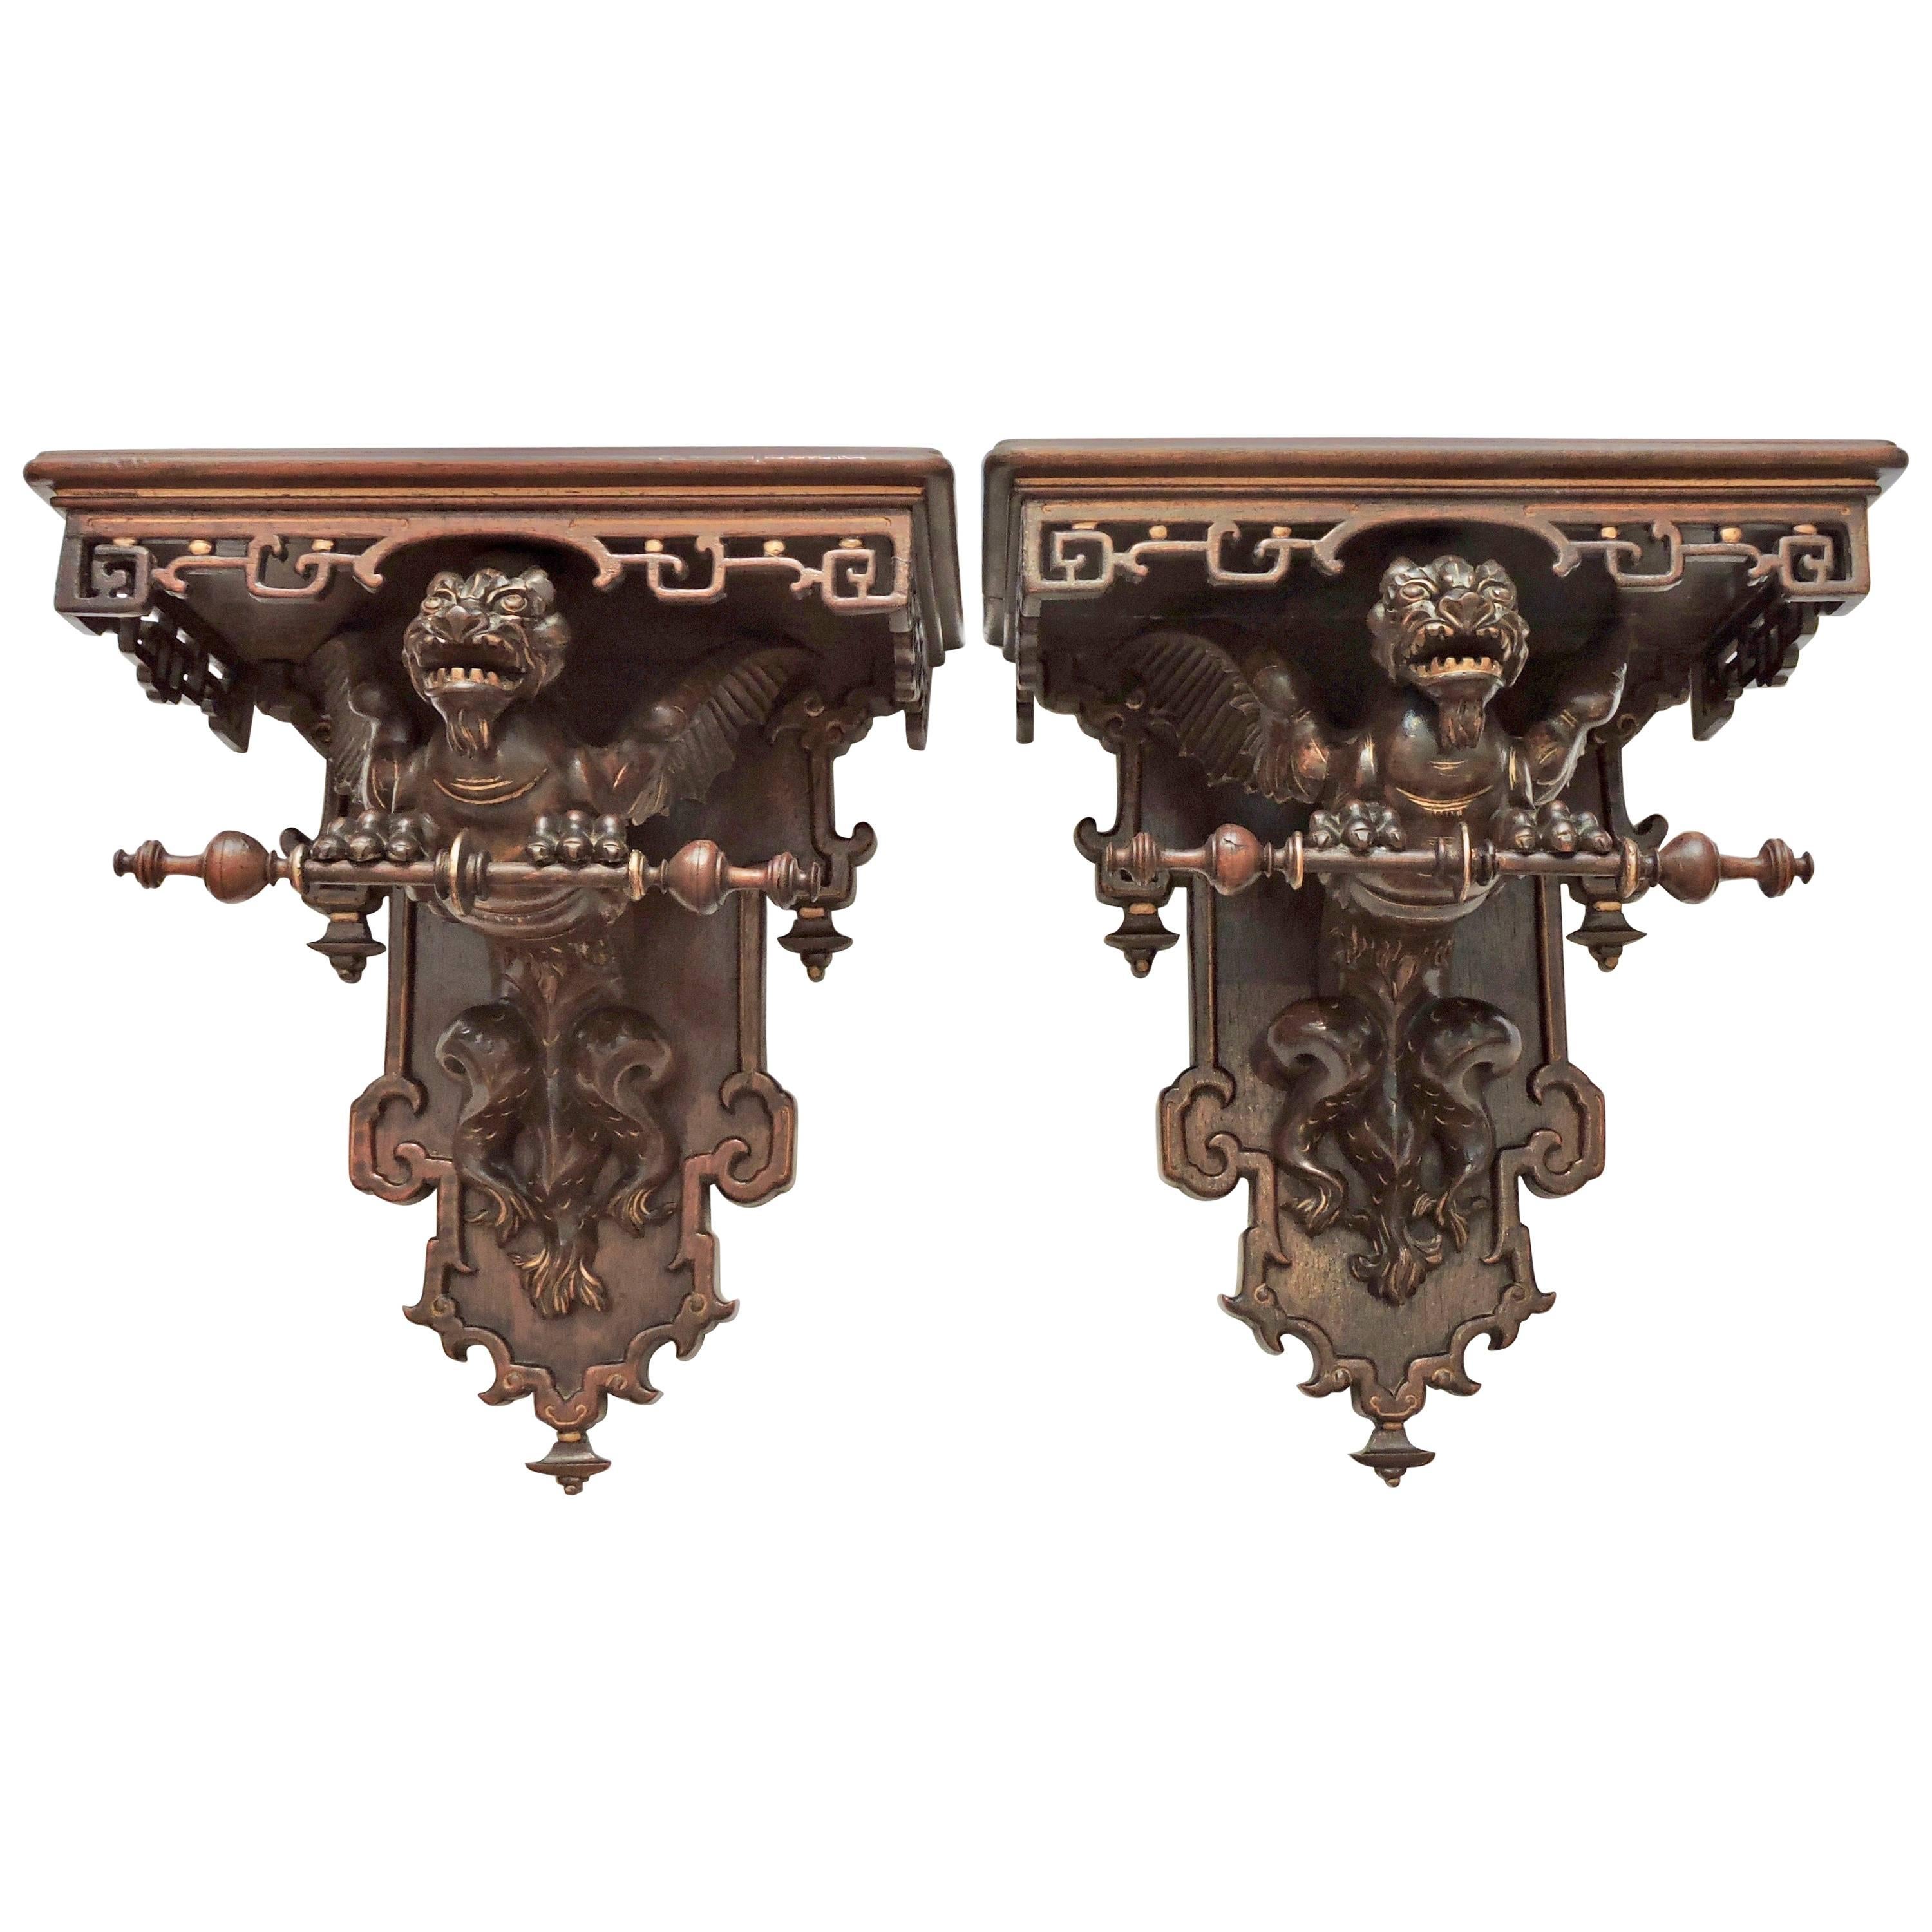 Pair of 19th Century French Japonisme Console Style Wall-Brackets